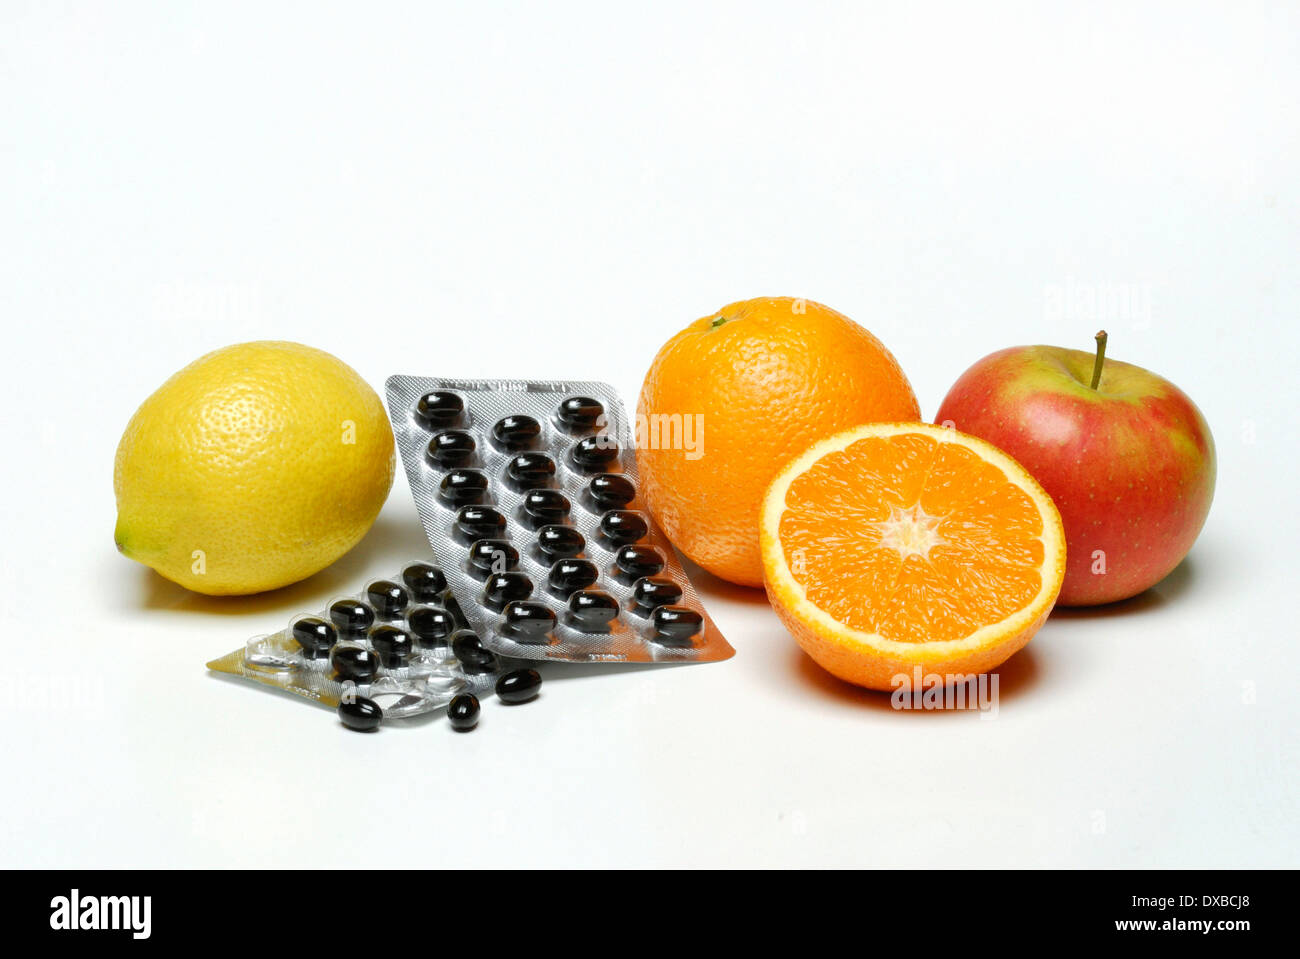 Fruit and nutritional supplement Stock Photo